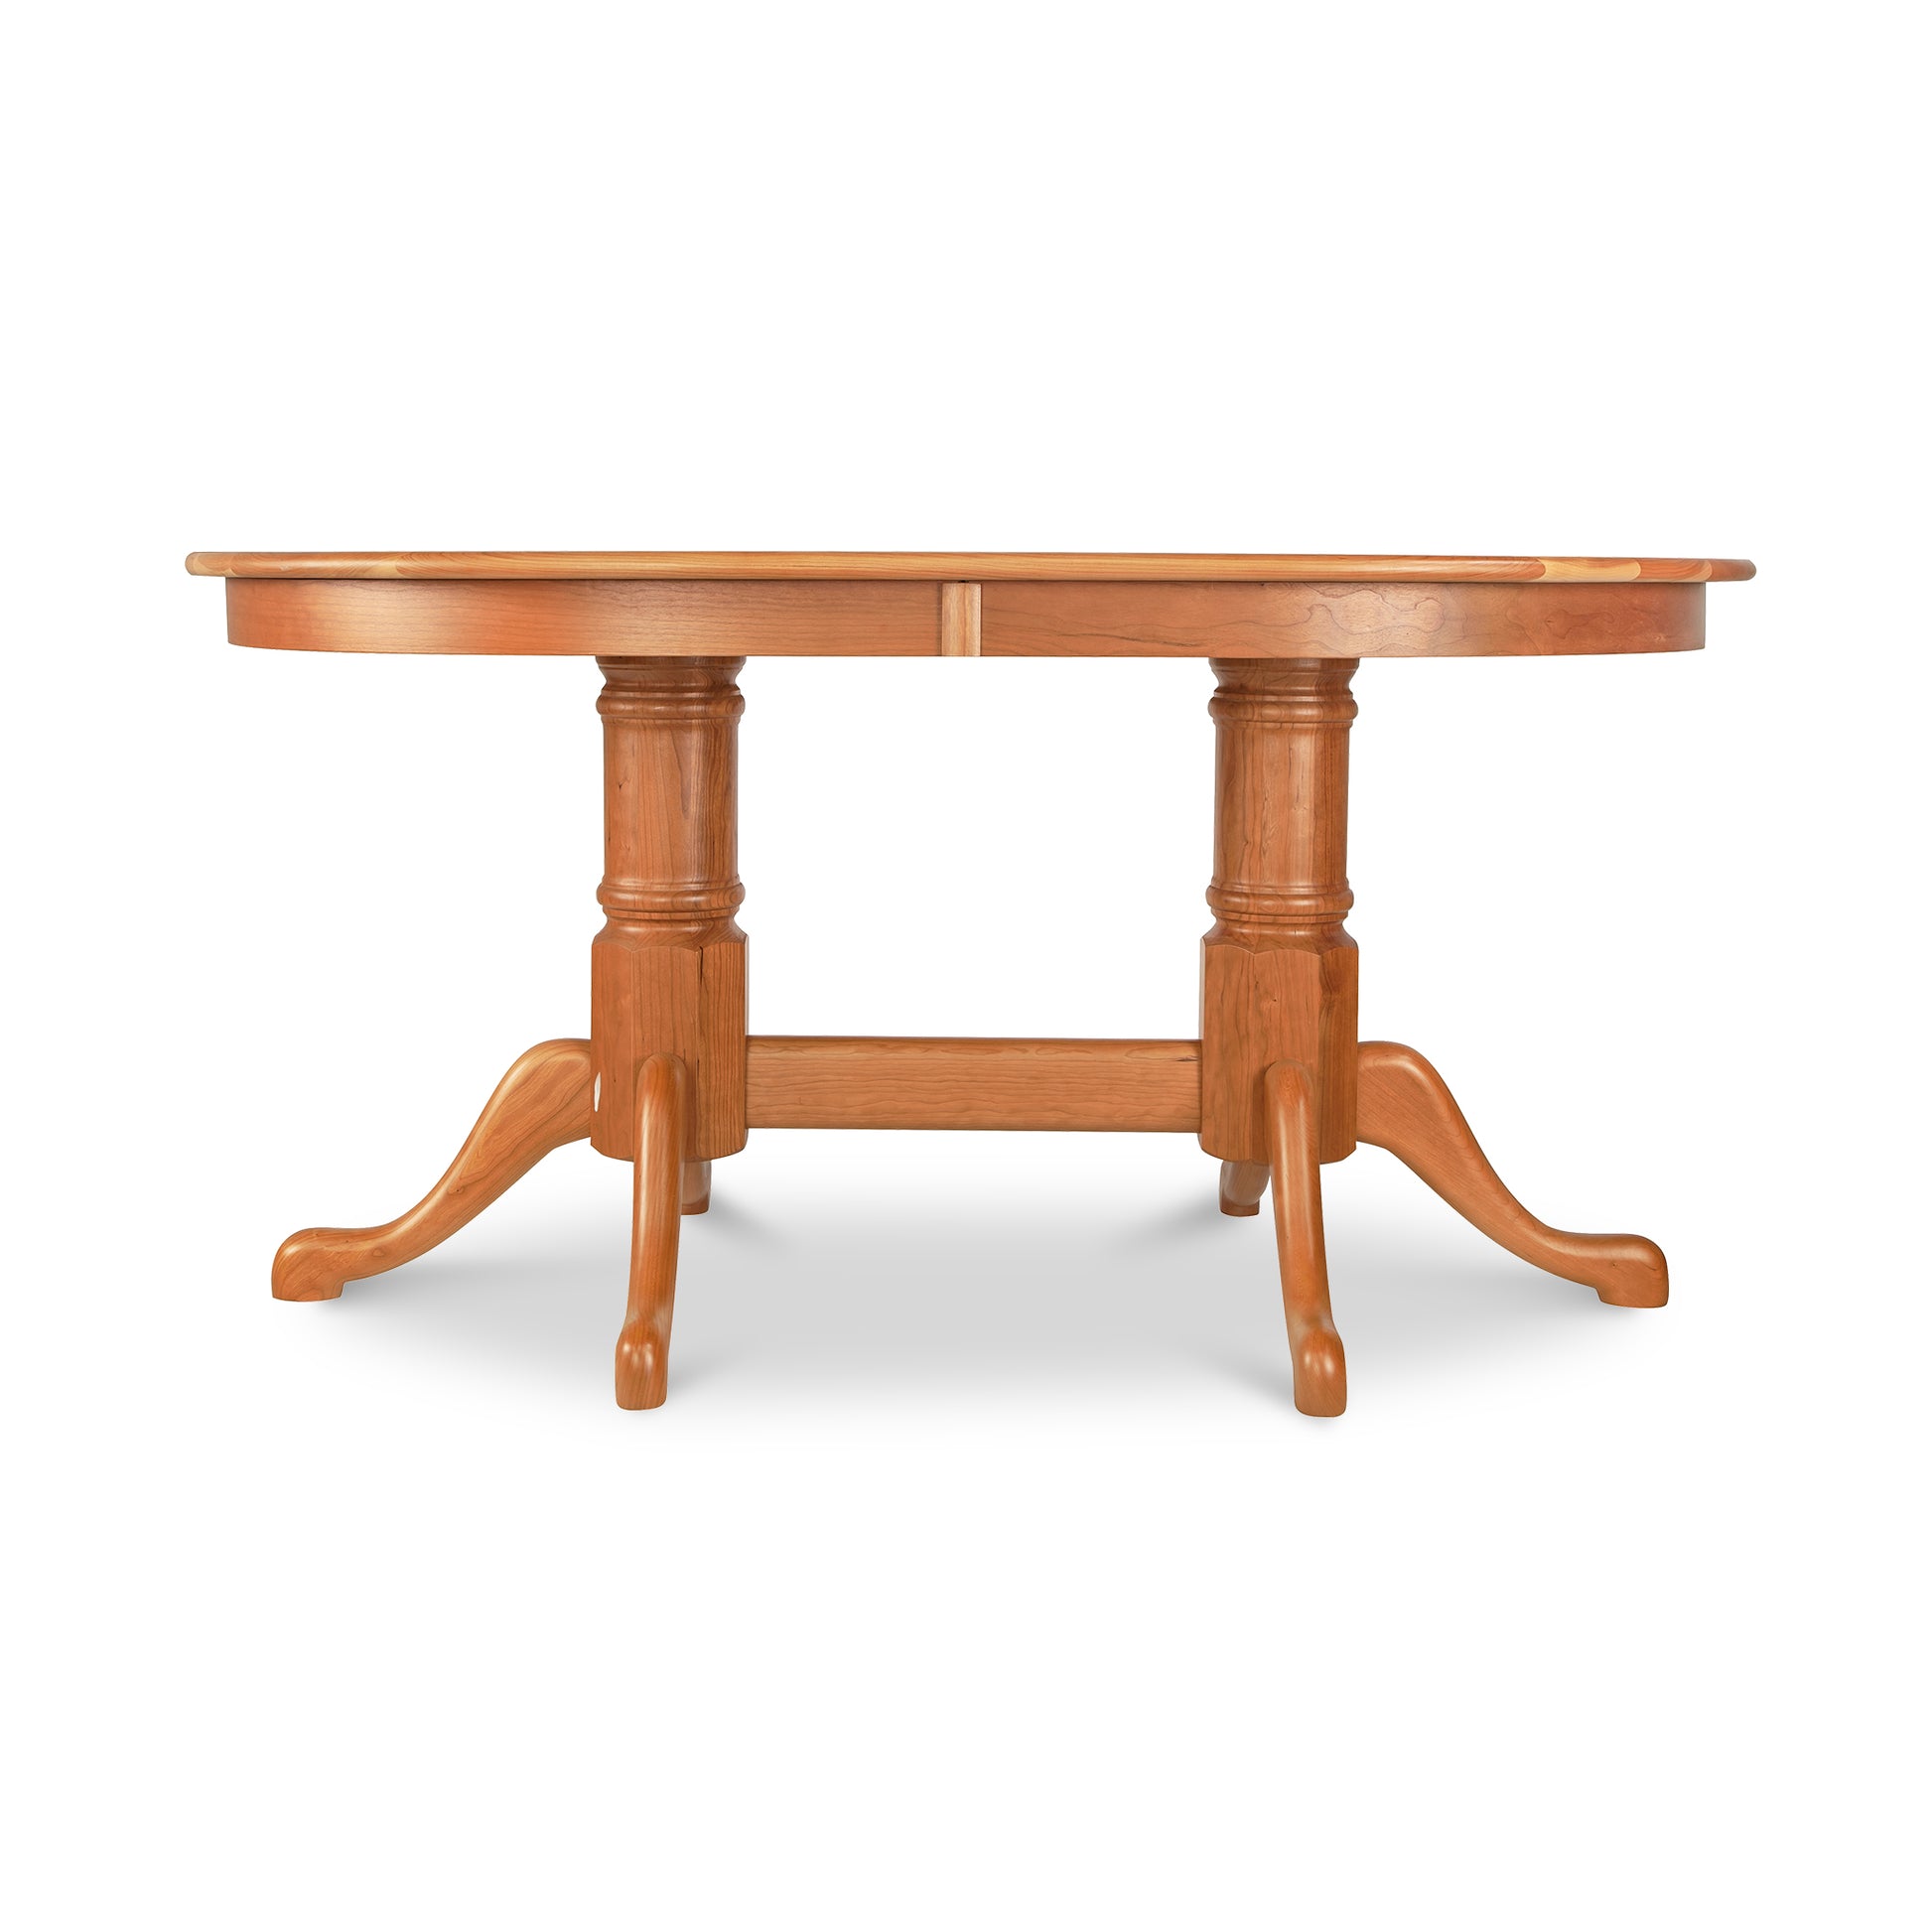 A wooden dining table with three legs.